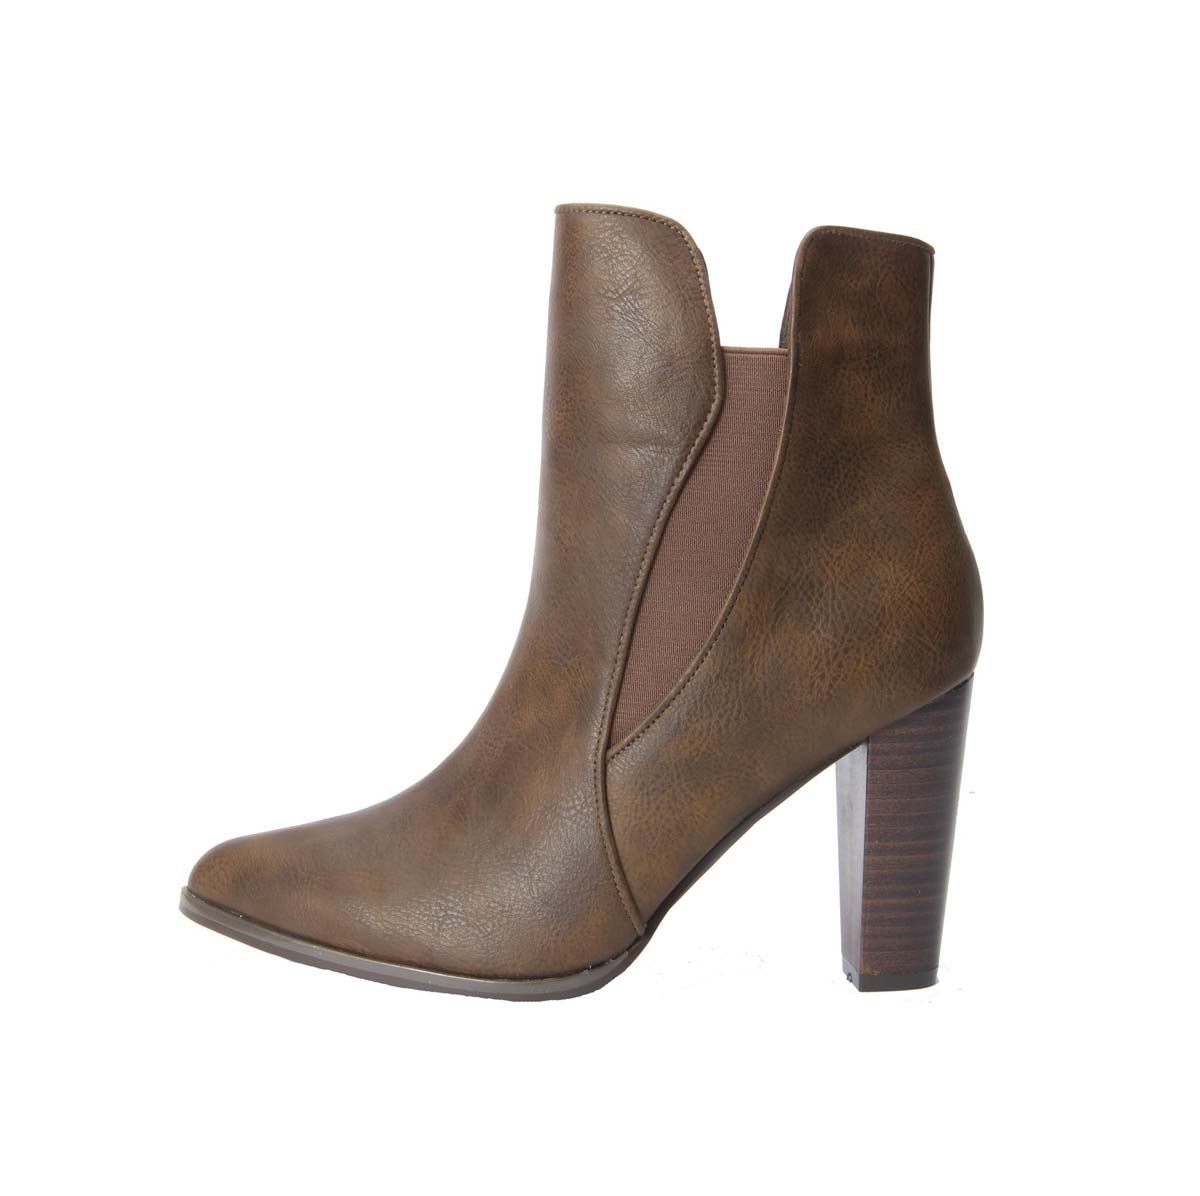 PENNY LOVES KENNY AVID WOMEN BOOTIE IN KHAKI TUMBLED - TLW Shoes